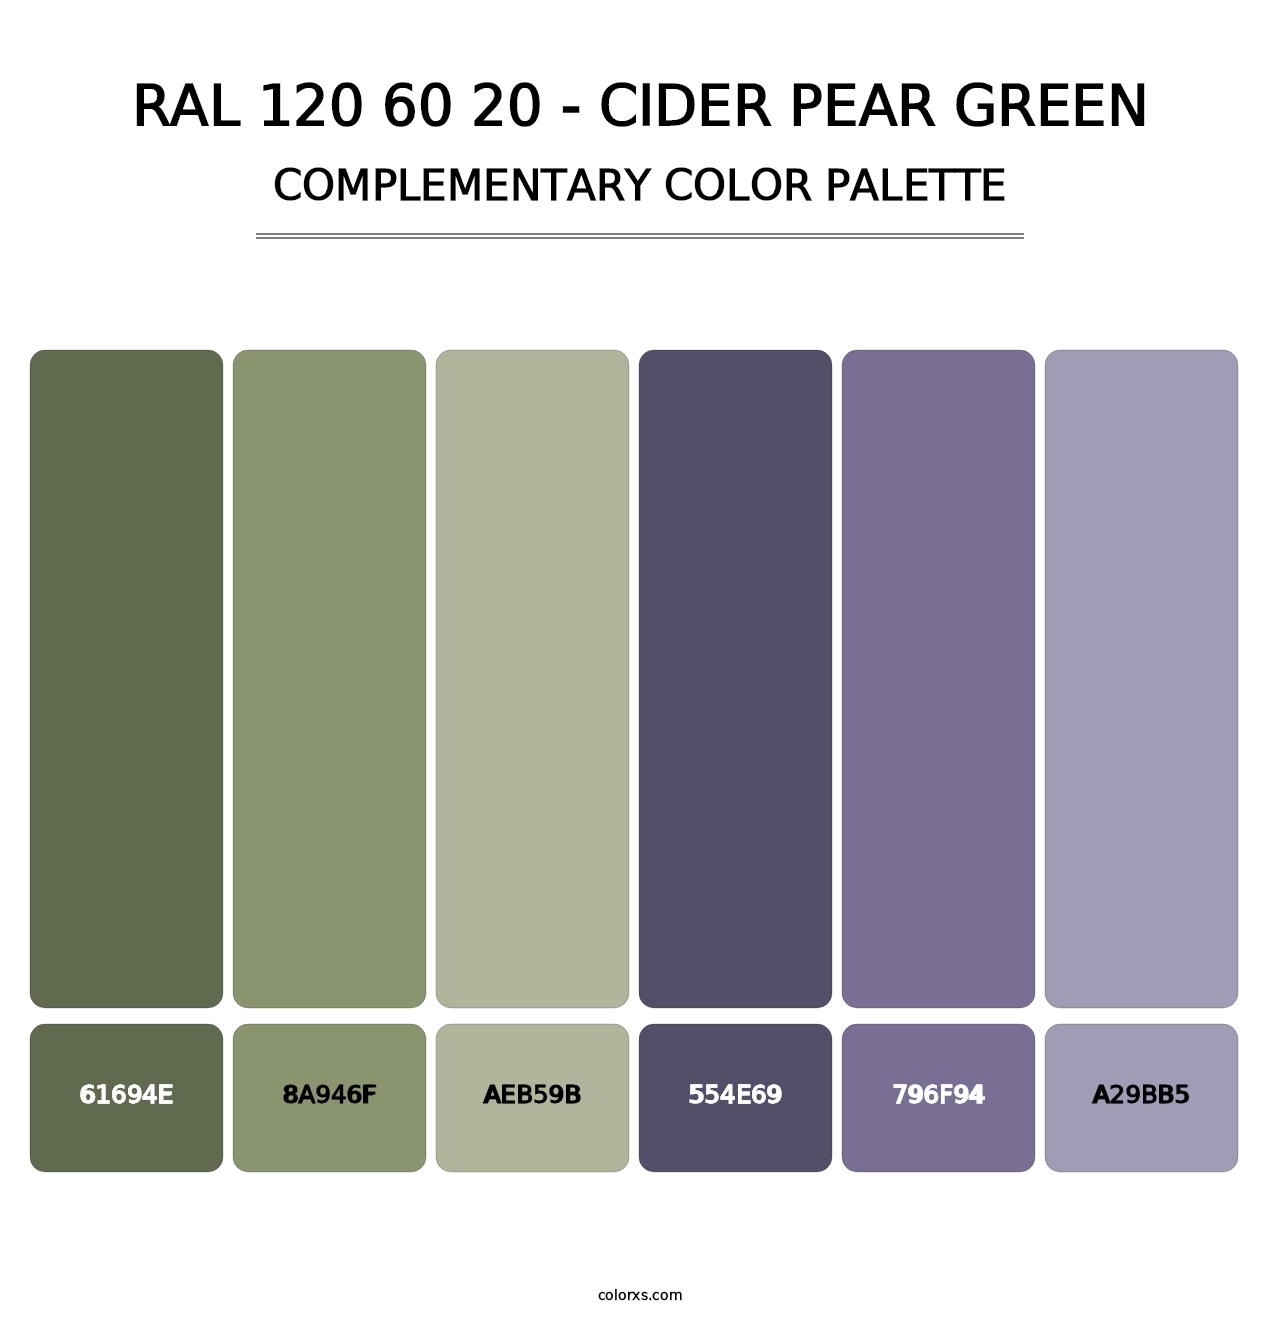 RAL 120 60 20 - Cider Pear Green - Complementary Color Palette